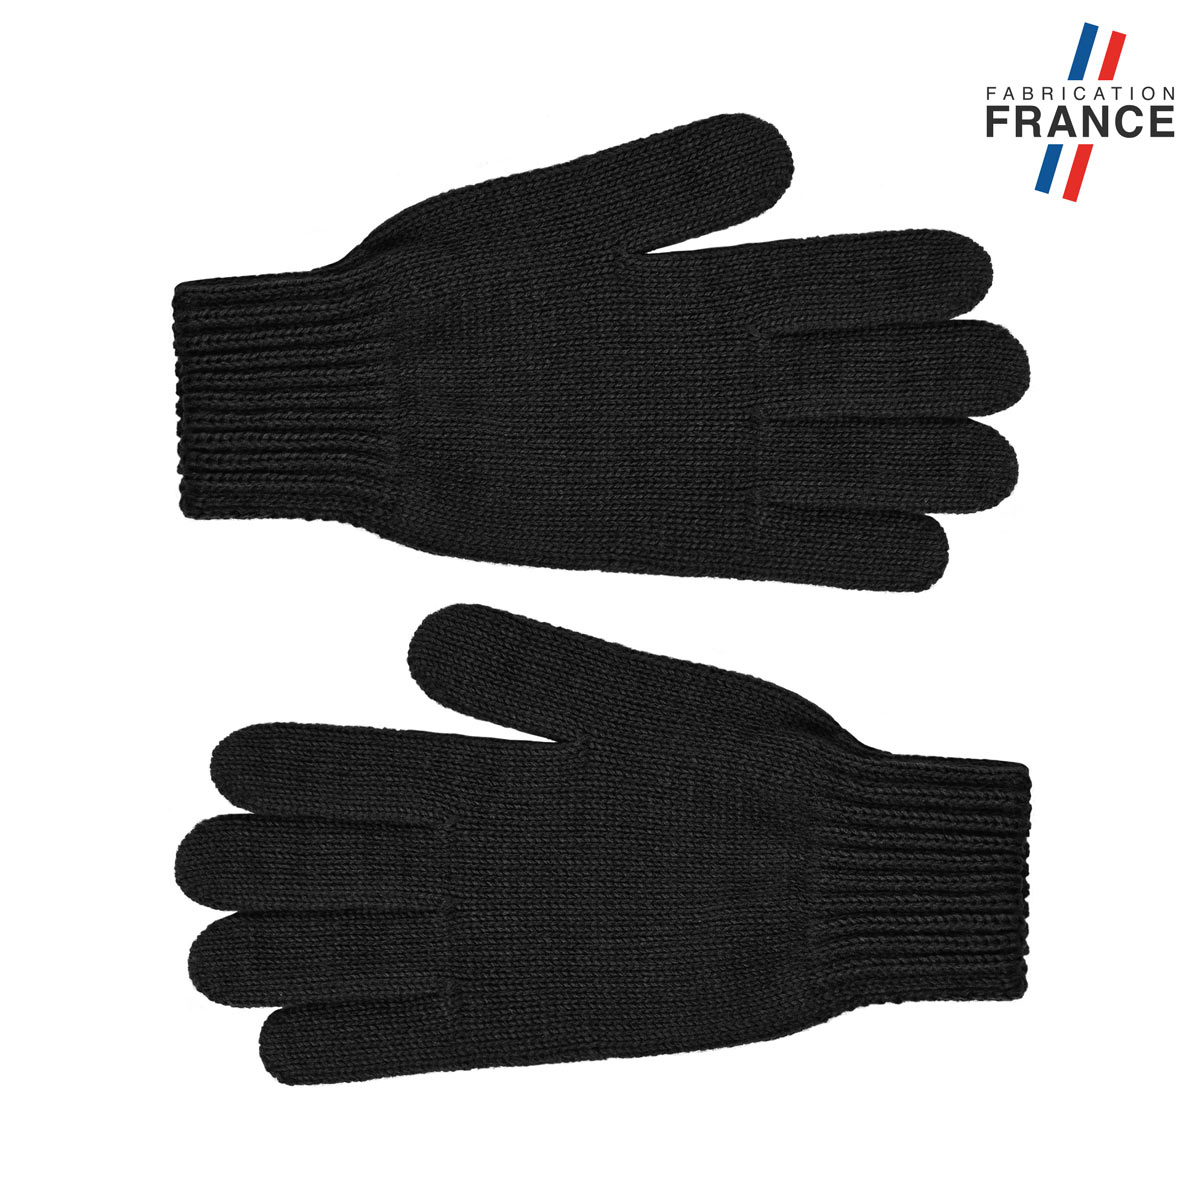 GA-00041_A12-1FR_Paire-gants_femme-noirs-made-in-France